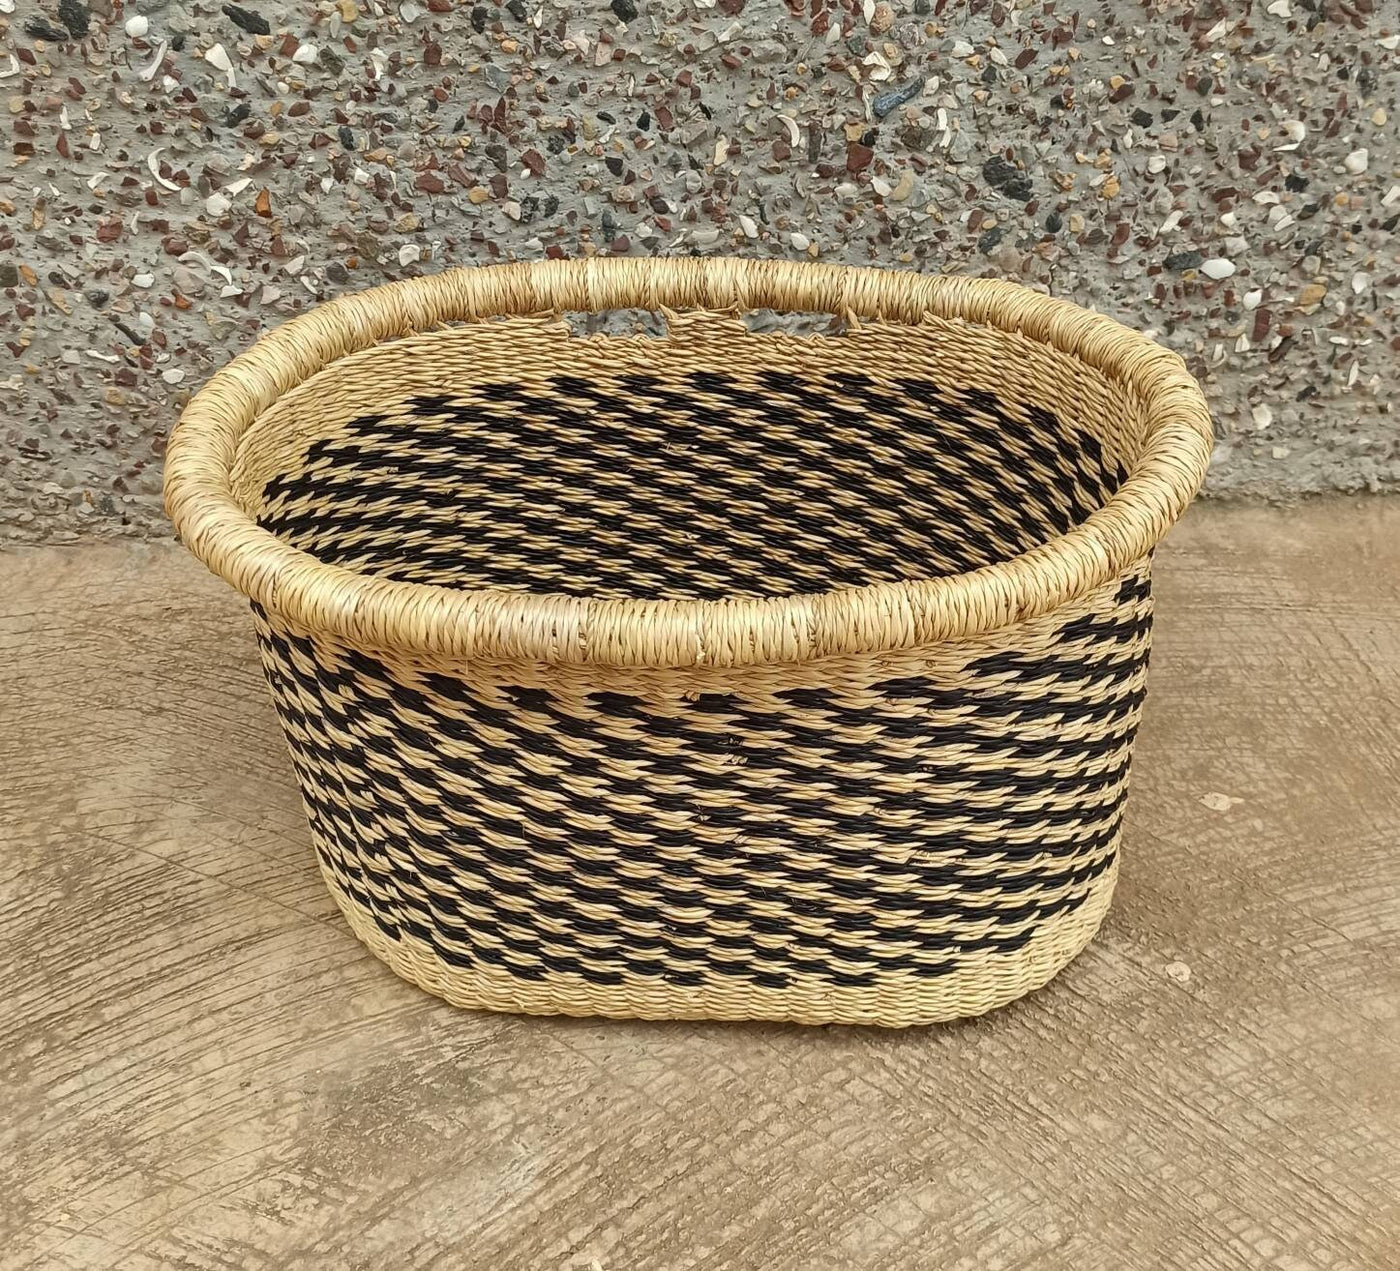 Basket for Bicycle - AfricanheritageGH